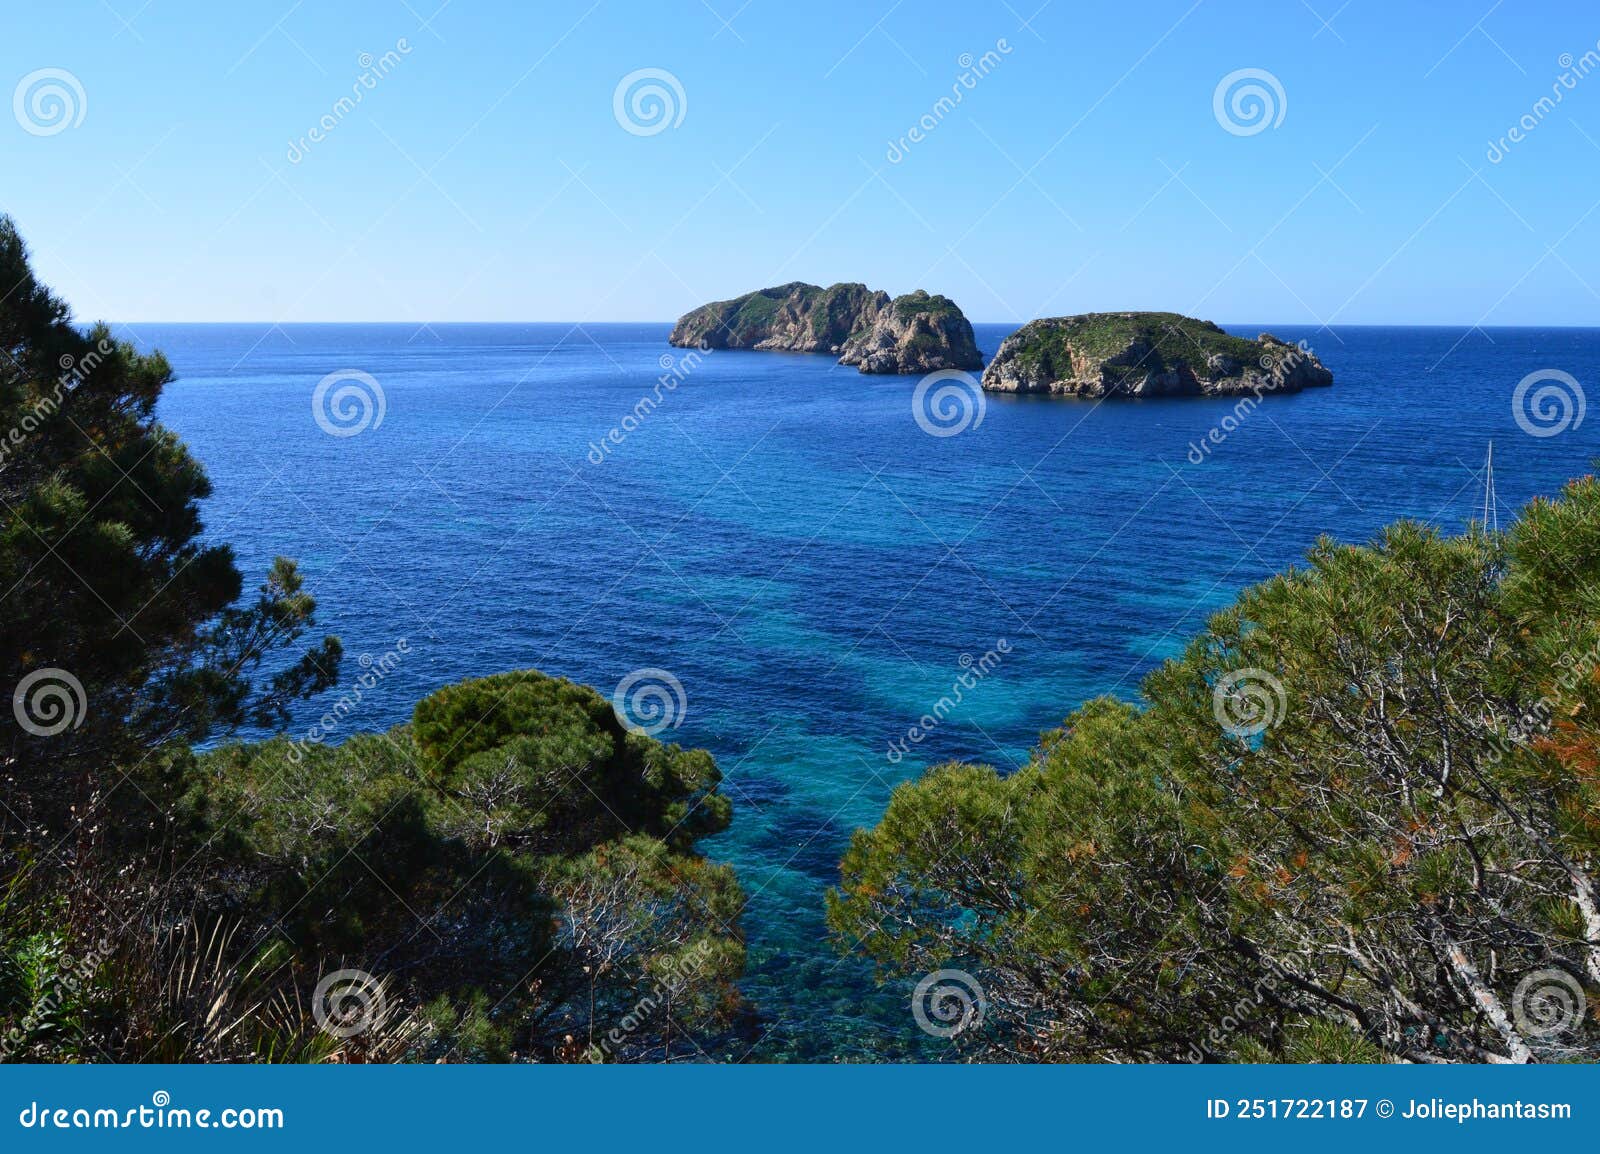 view of malgrats islands from mallorca with waves from the mediterranean sea